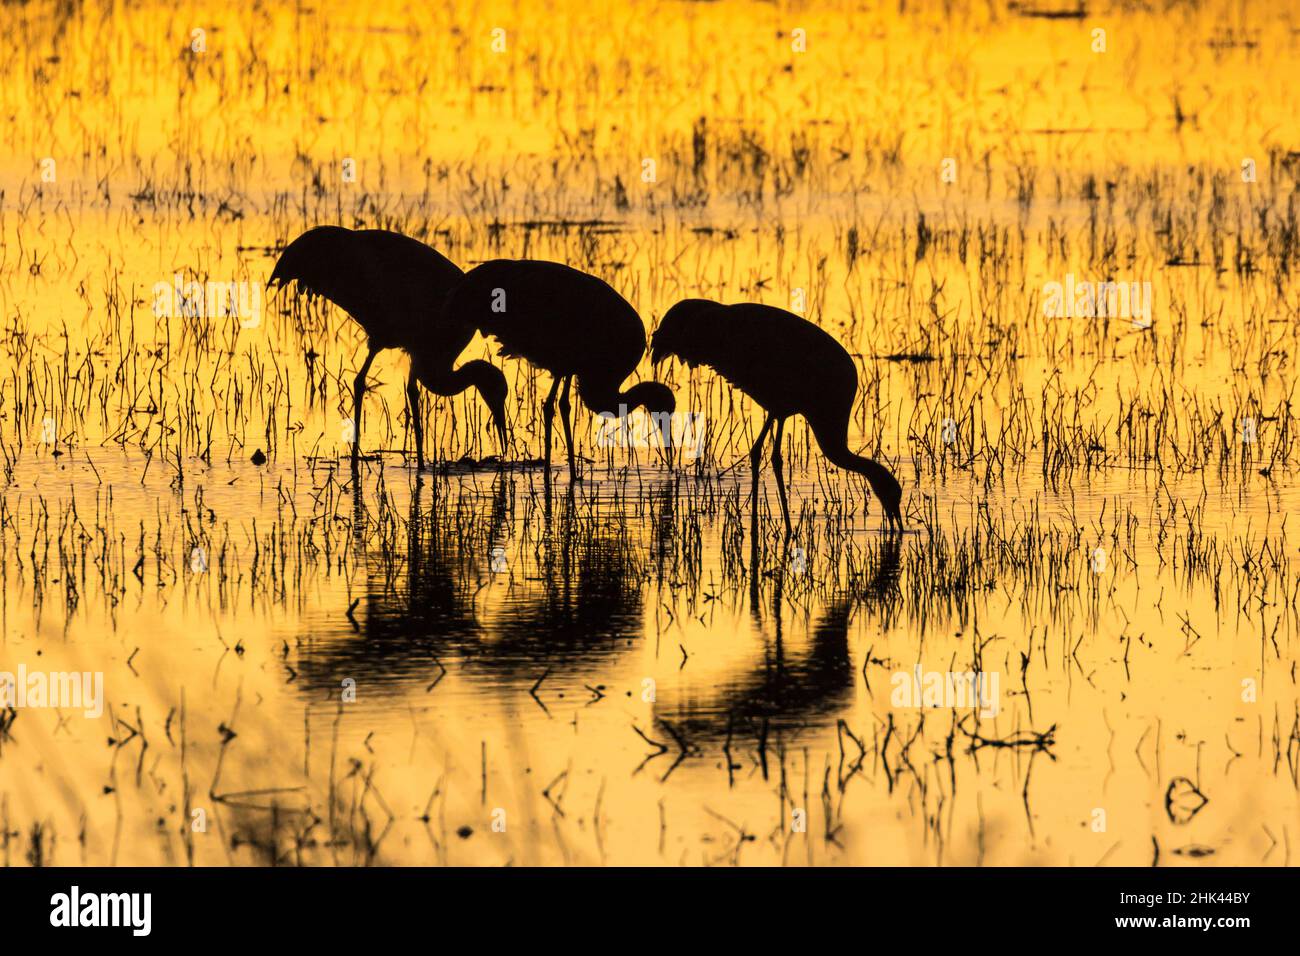 USA, New Mexico, Bosque del Apache Natural Wildlife Refuge. Sandhill cranes backlit at sunset. Credit as: Cathy & Gordon Illg / Jaynes Gallery / Danit Stock Photo